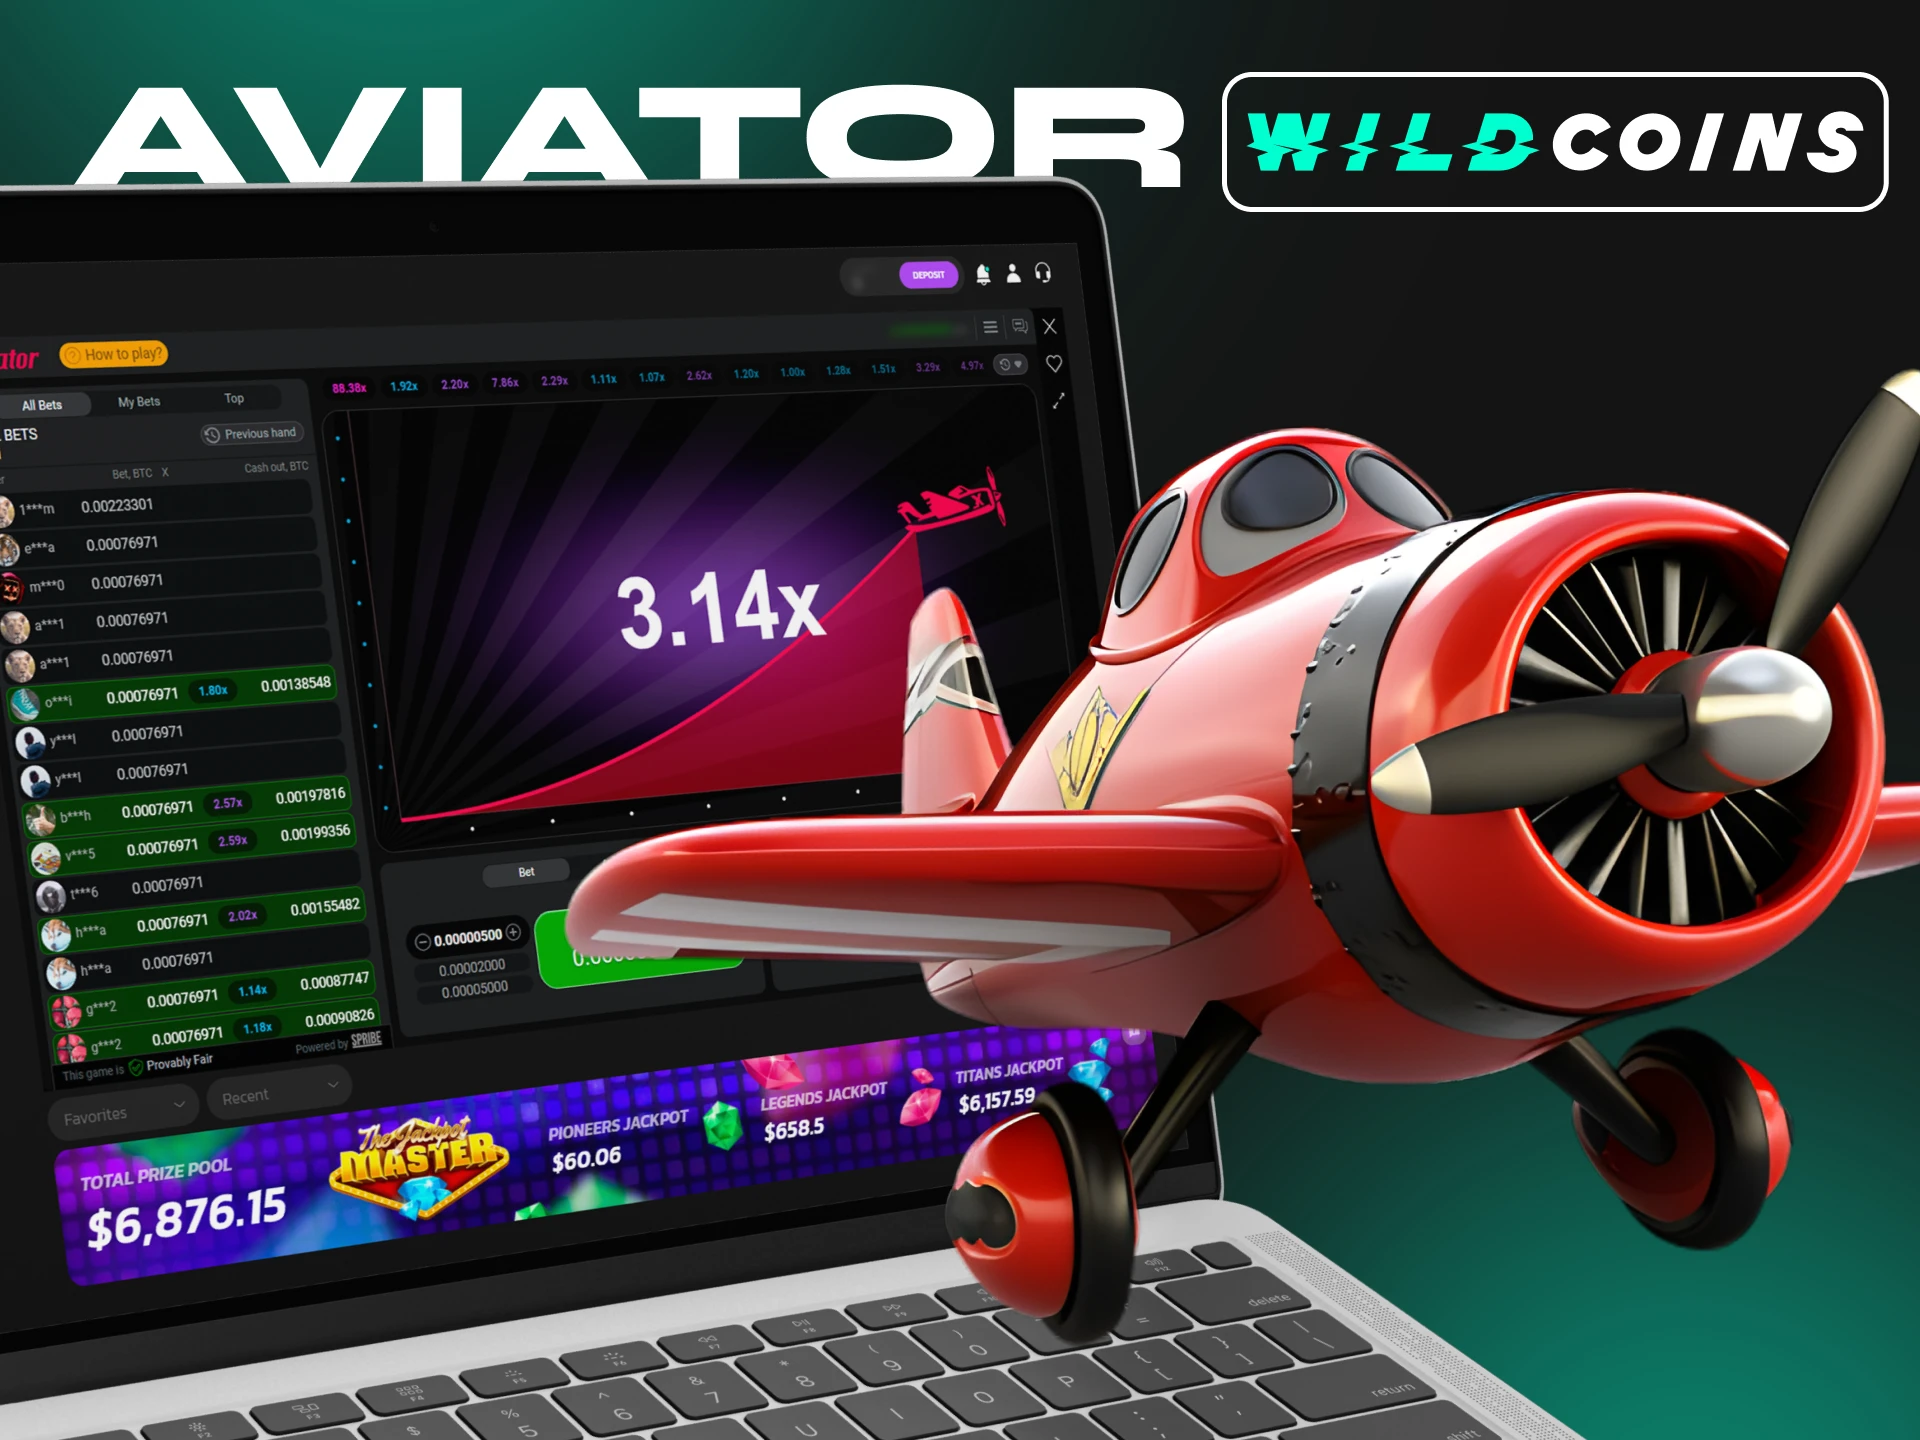 Aviator is the most popular crash game, try playing on WIldcoins.